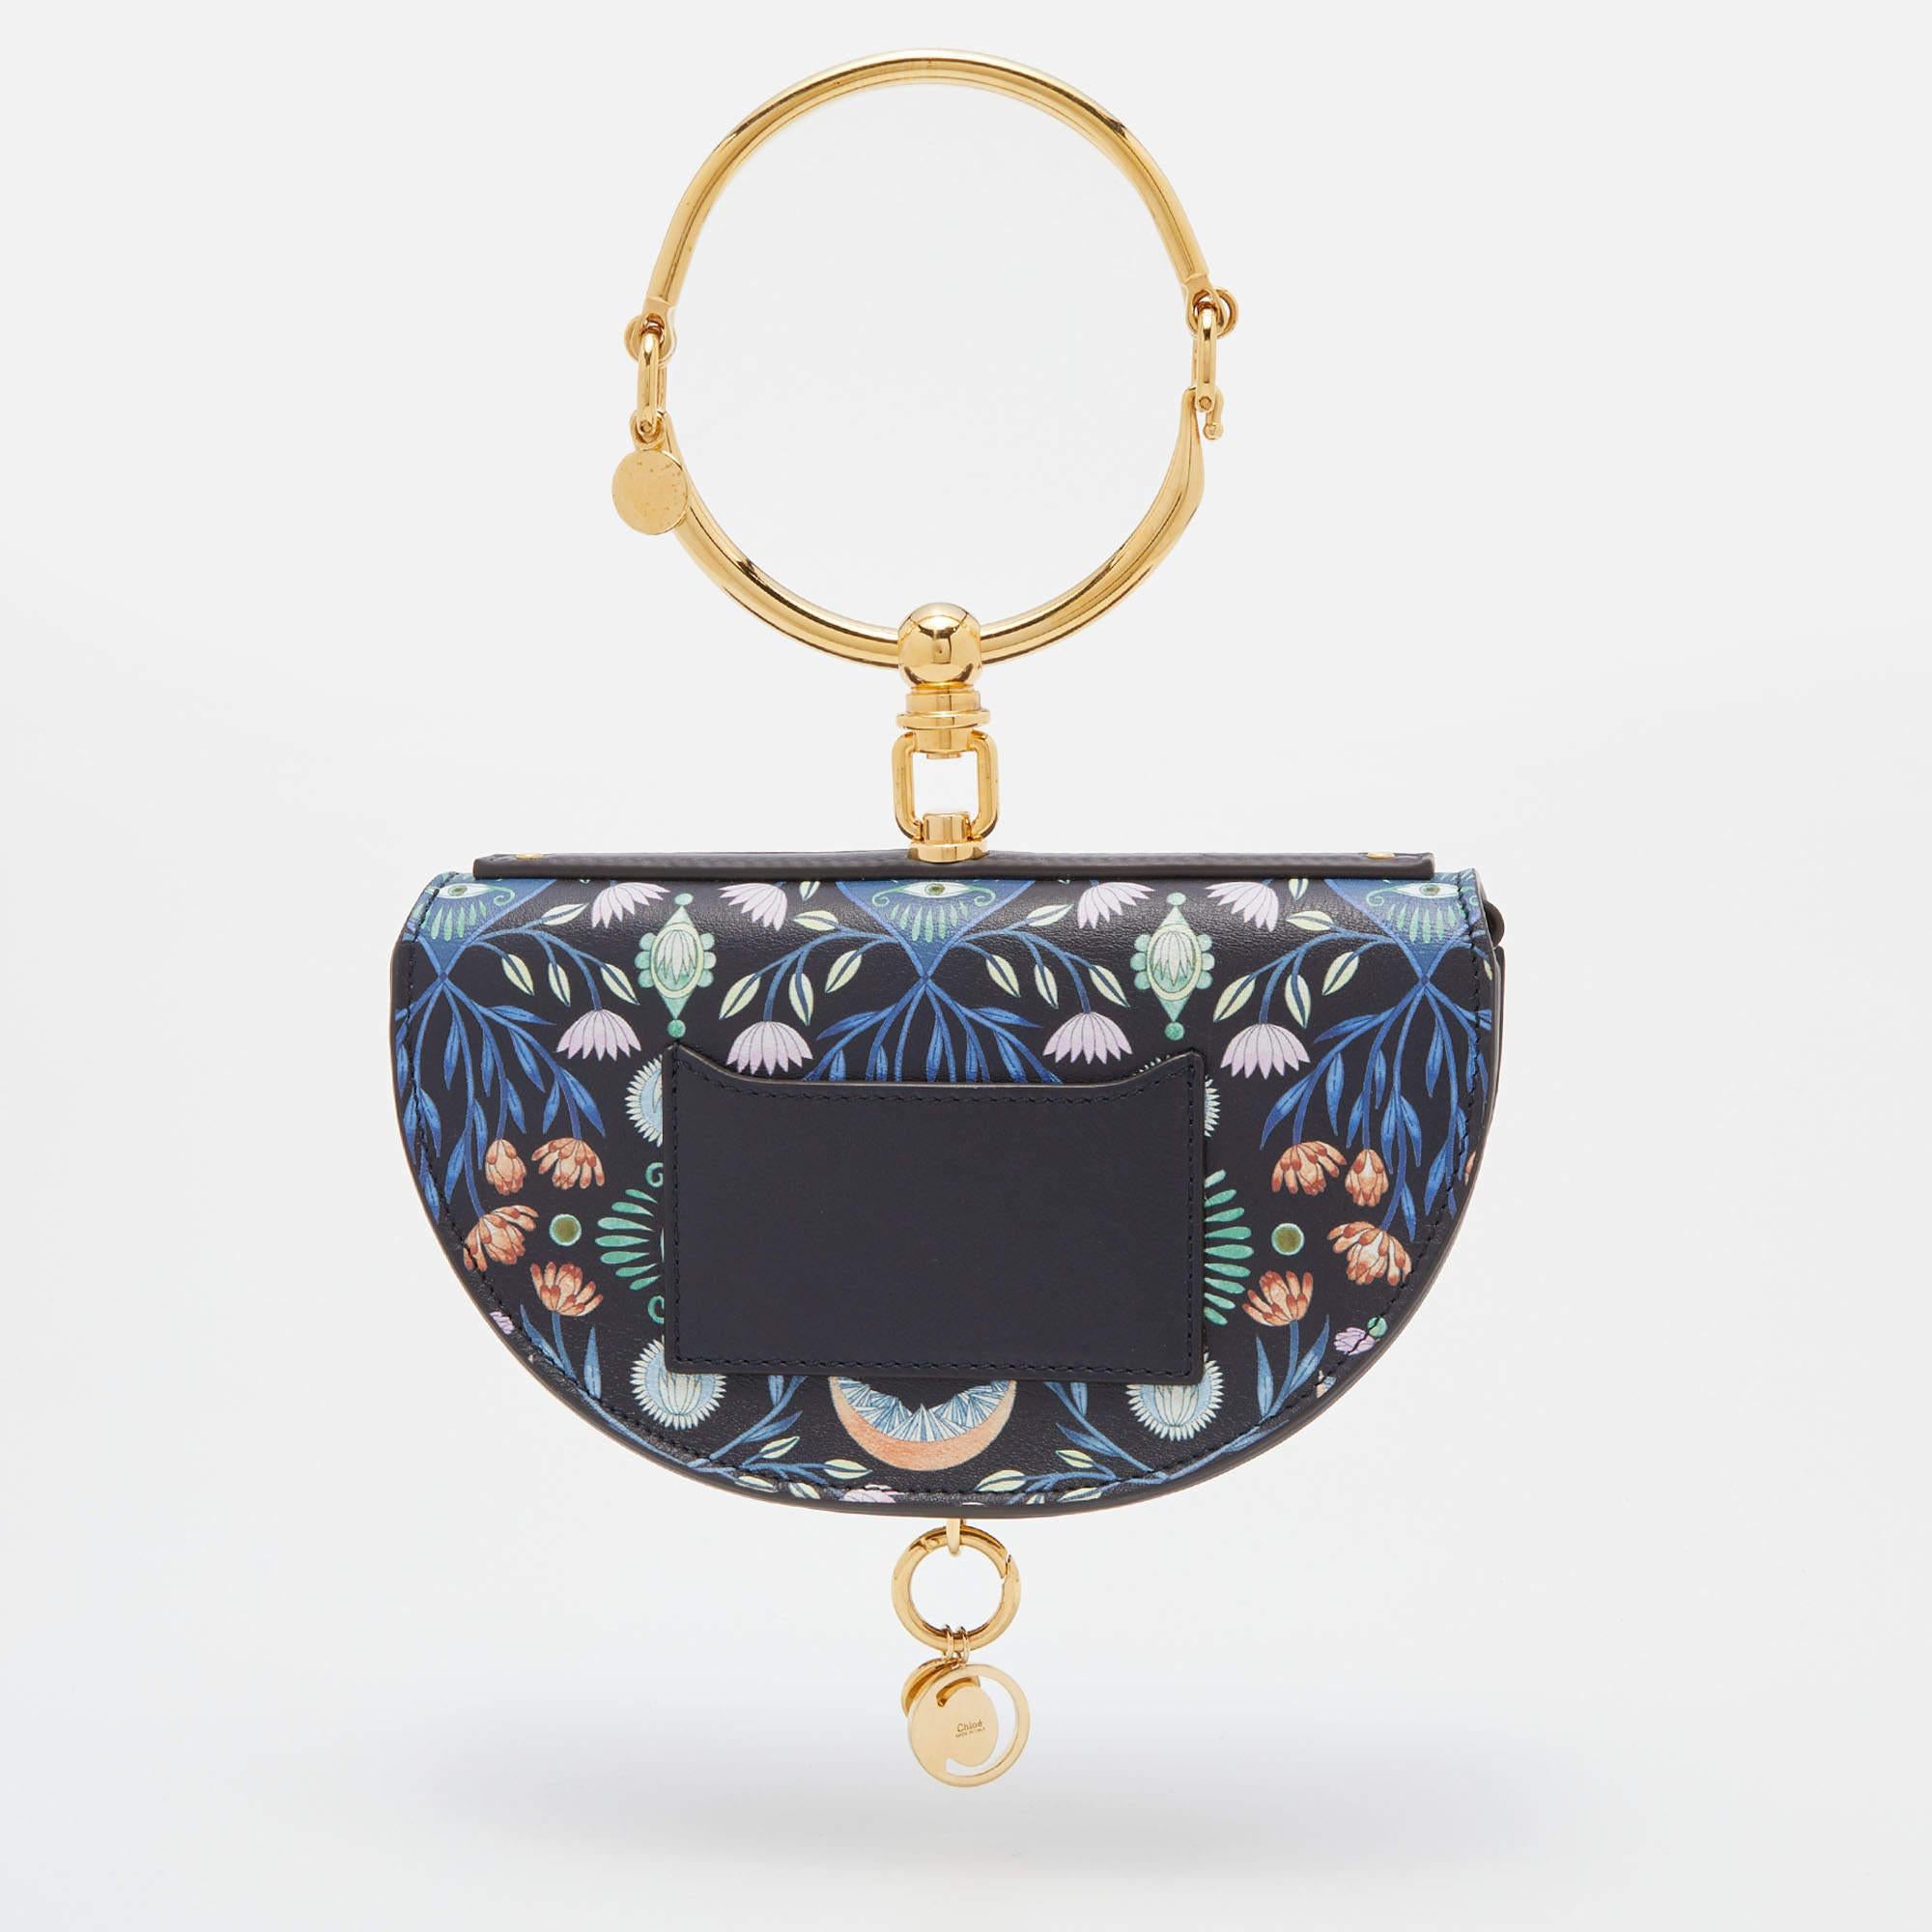 This one-of-a-kind Chloe Nile bracelet bag is from a special collaboration with Indian artist Rithika Merchant. The Nile's iconic half-moon silhouette is lit with wondrous motifs from the artist's universe. A truly special piece.

Includes: